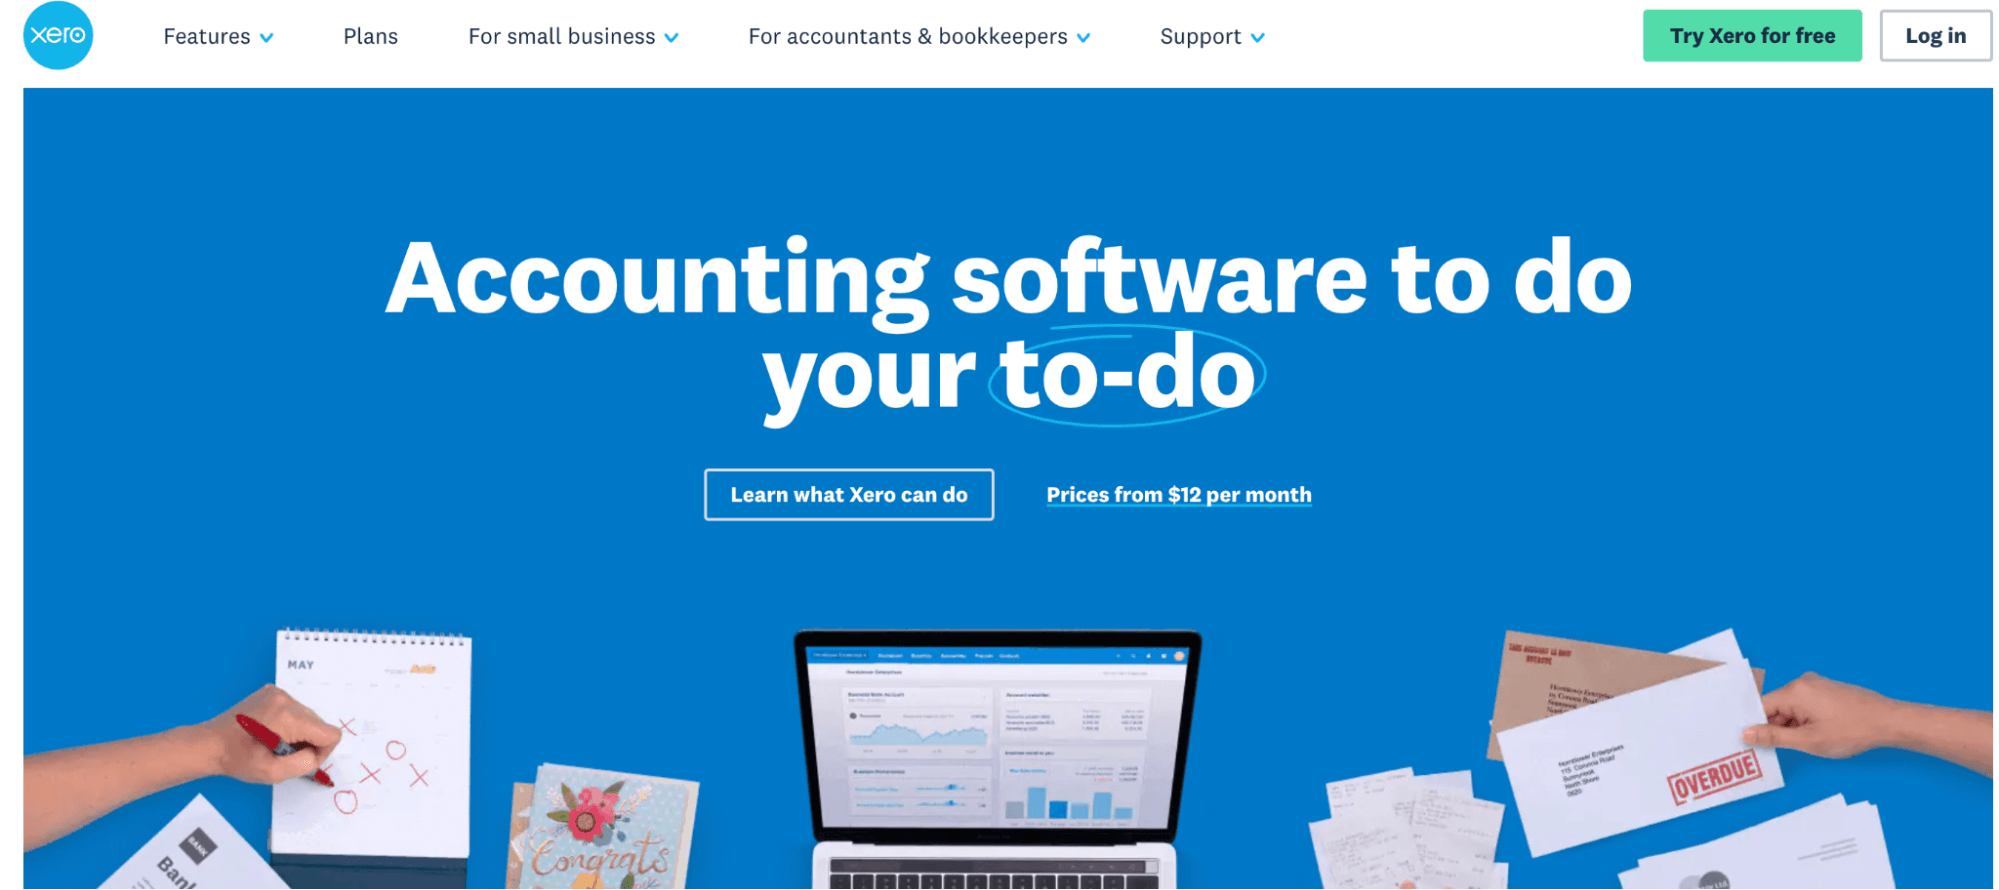 The homepage for Xero